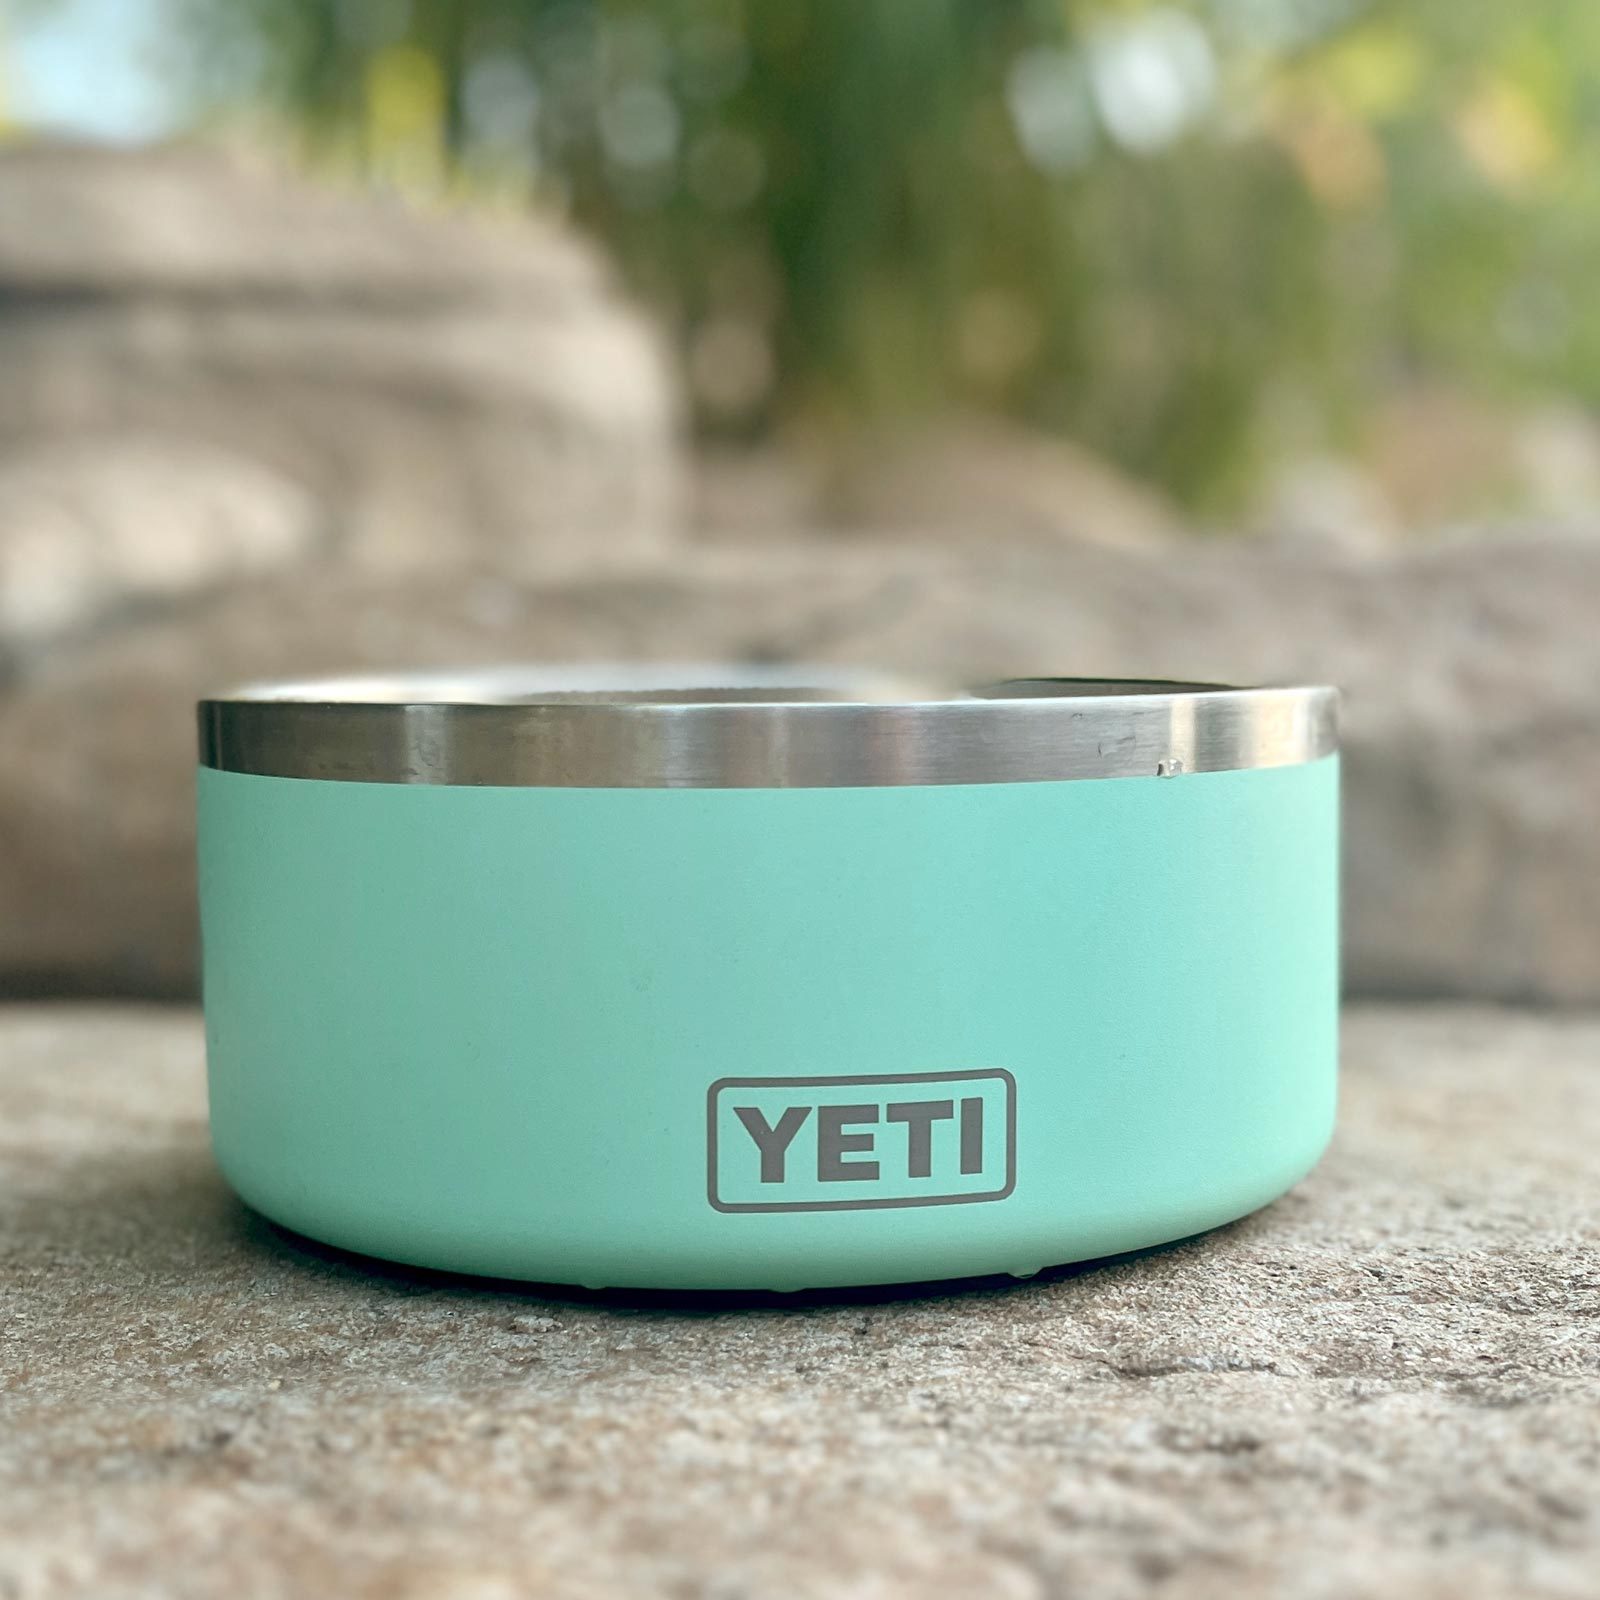 Is the Yeti No-Skid Dog Bowl Worth the Money? We Put It to the